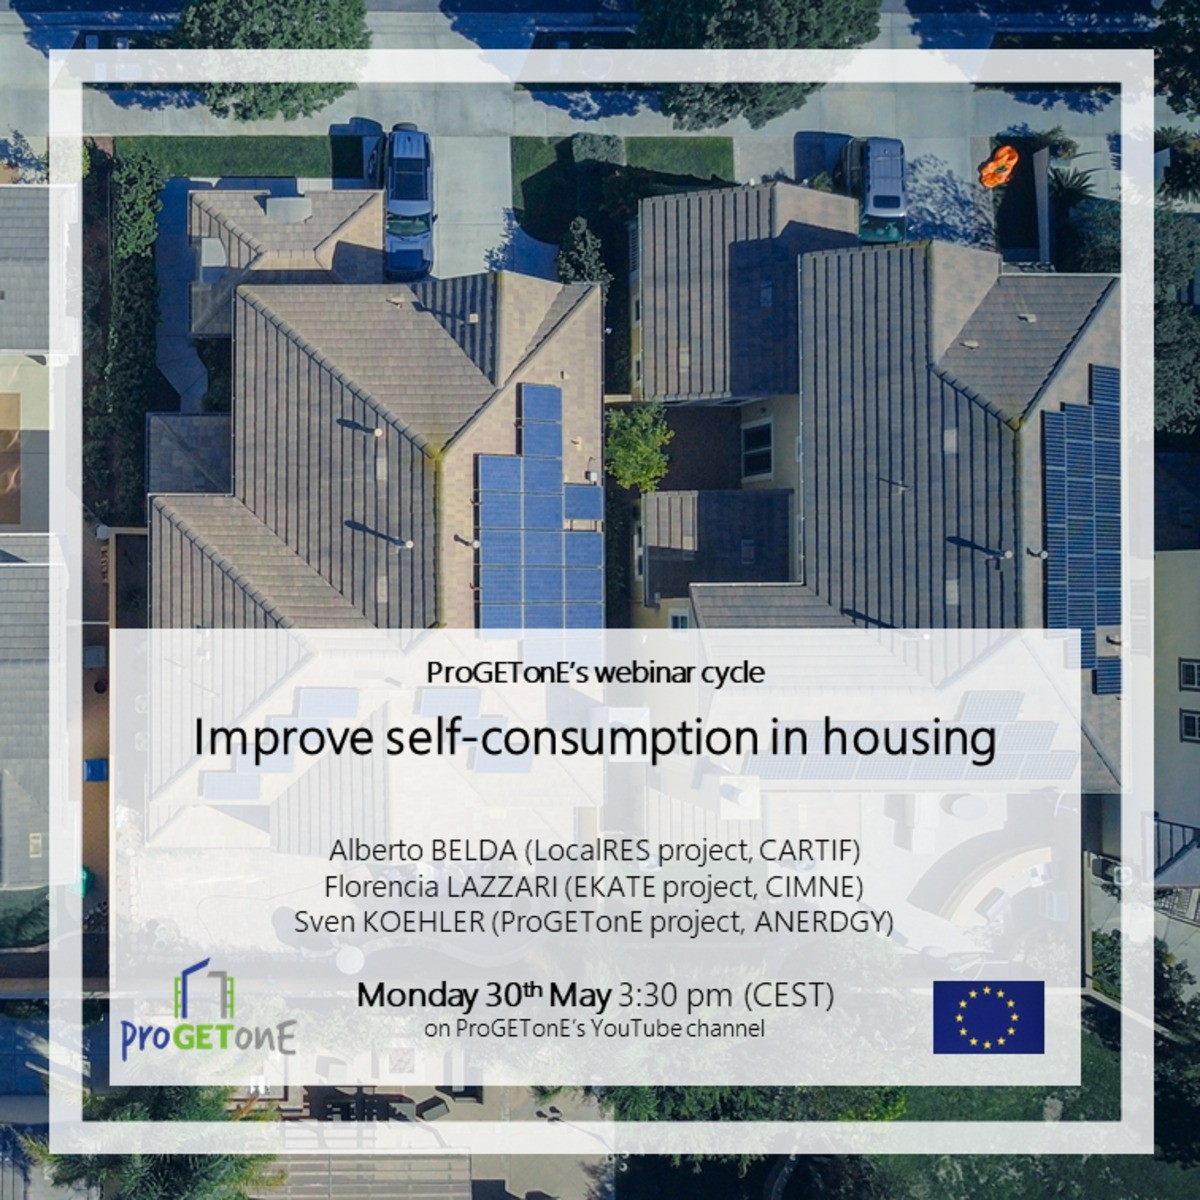 Optimizing energy communities and improving self-consumption in housing sector